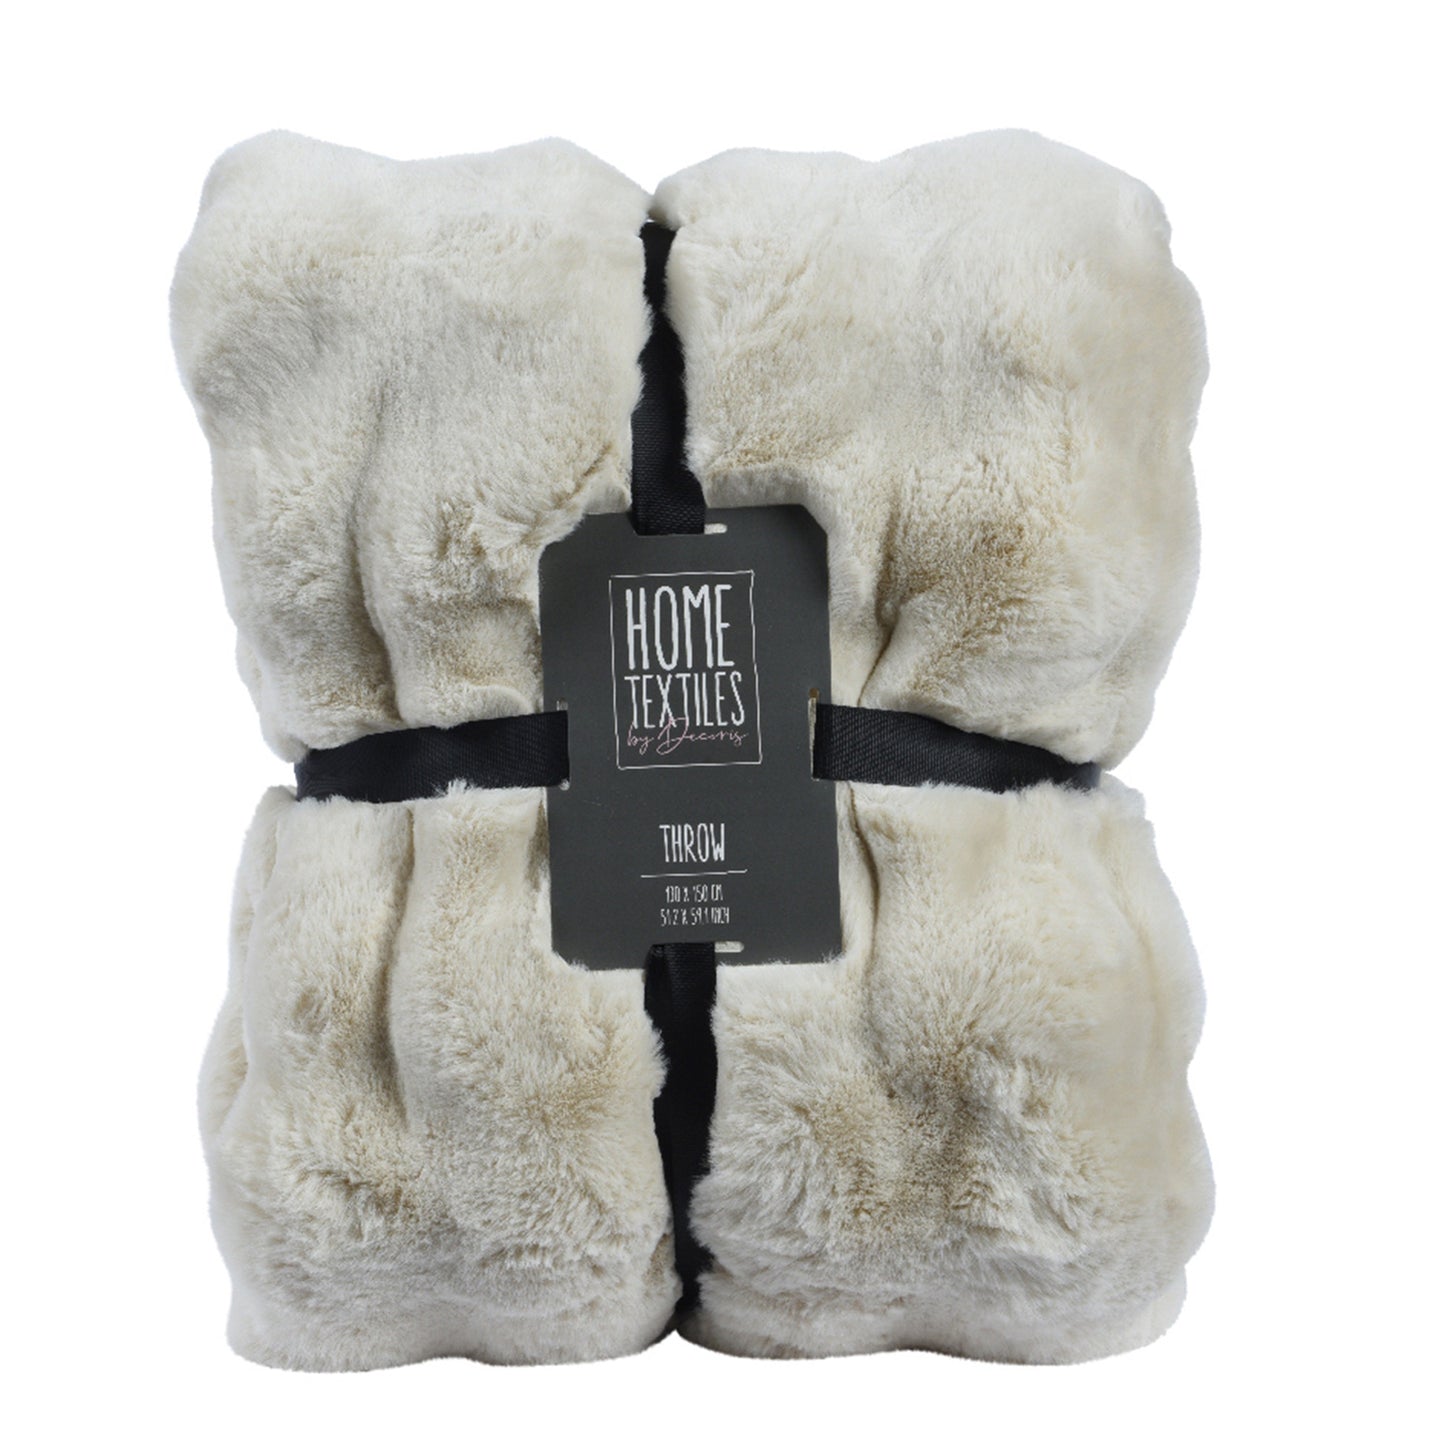 soft and luxurious faux fur throw, mimicking the fur of white rabbit. Throw is tied in a bundle with black fabric tape.